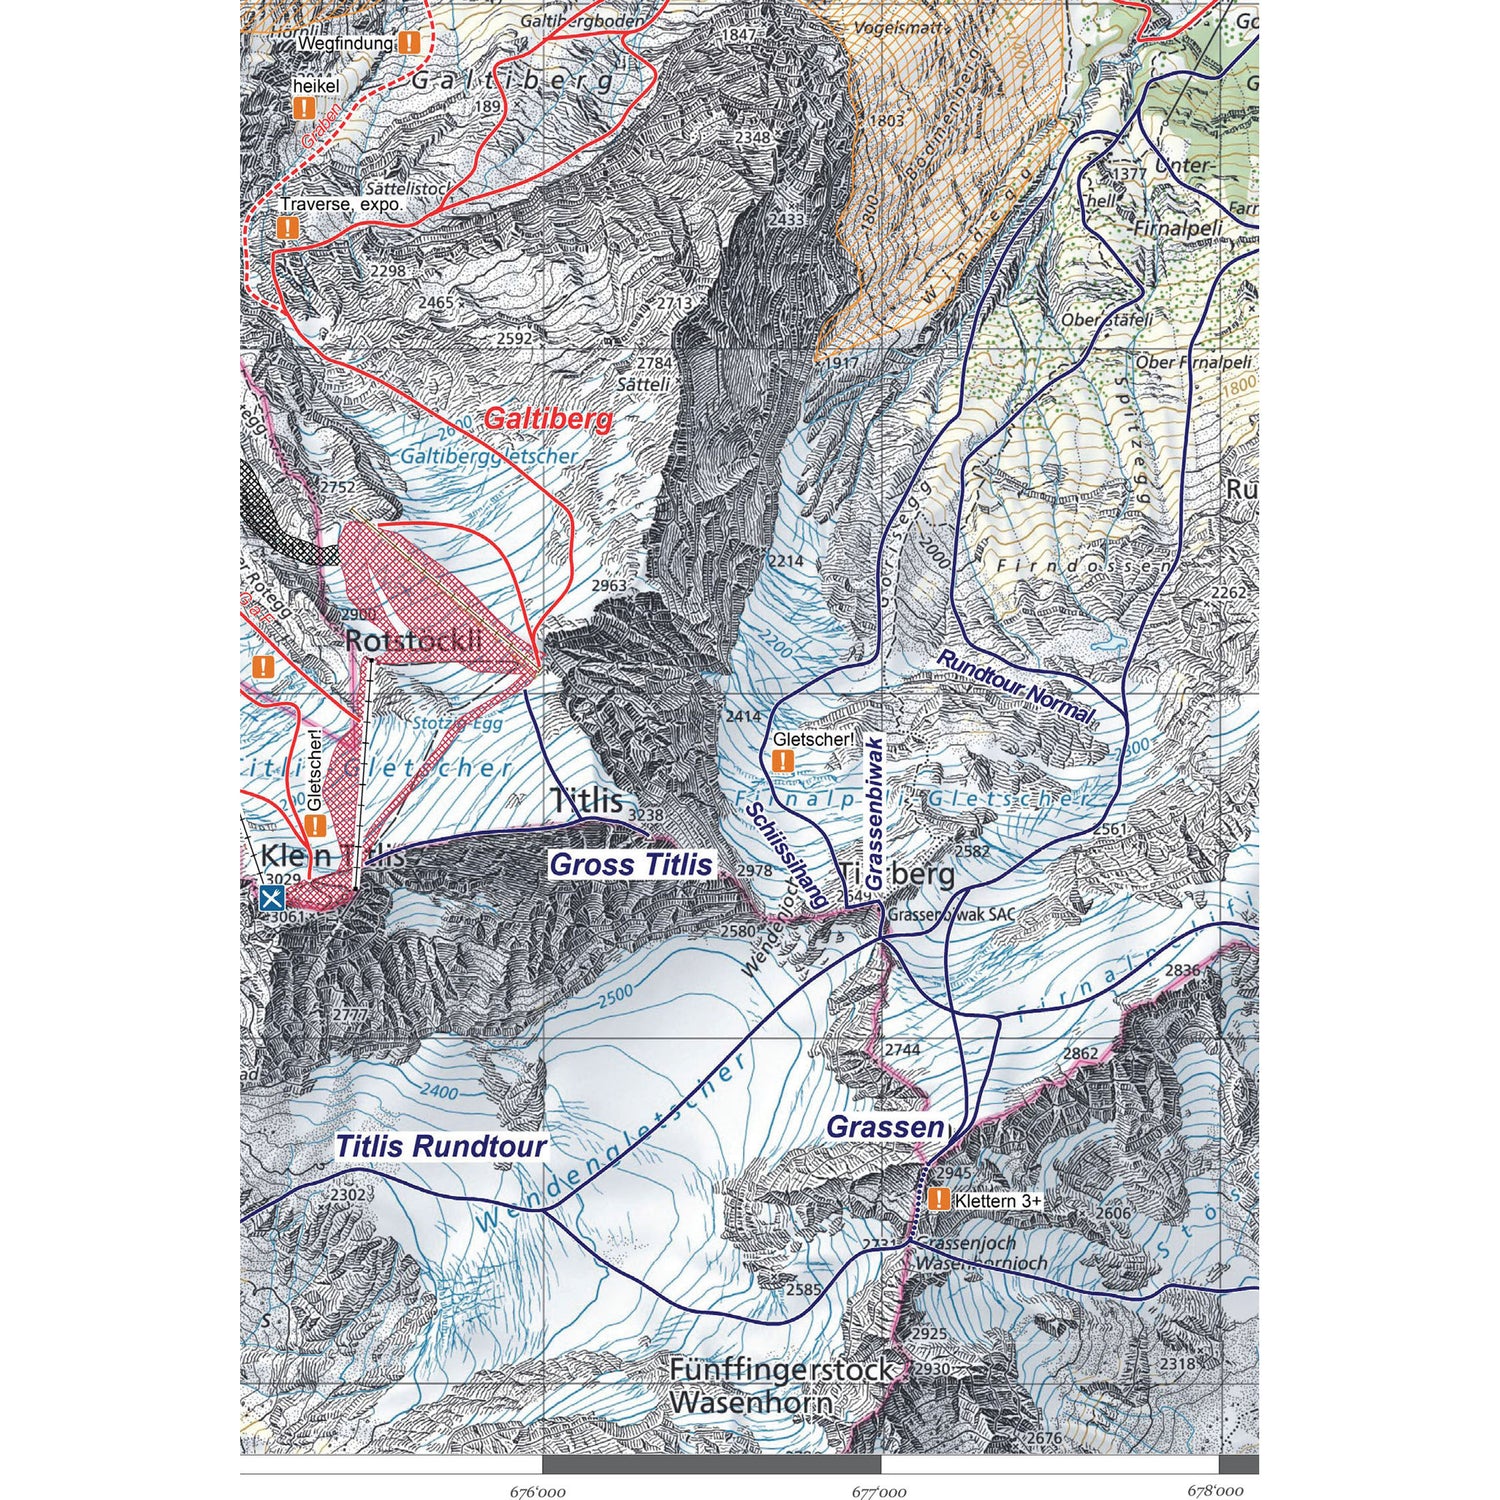 Freeride and Ski Touring Map Engelberg | Backcountry Books